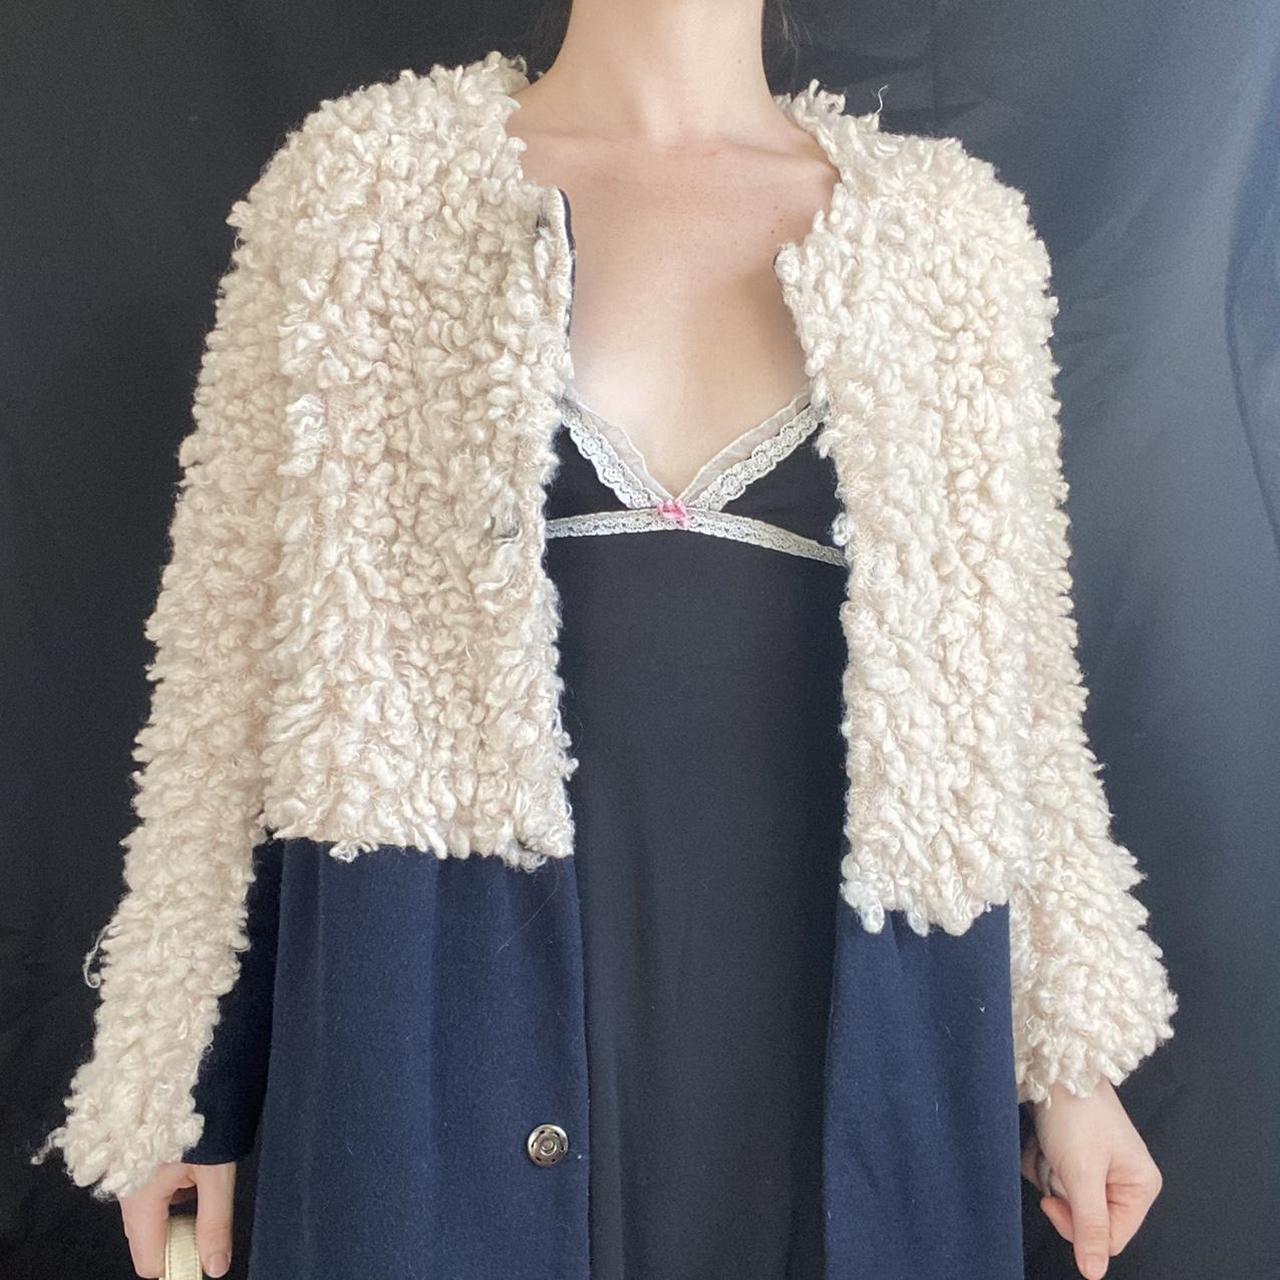 Product Image 2 - Y2K Shaggy Shearling Coat

By "Nu